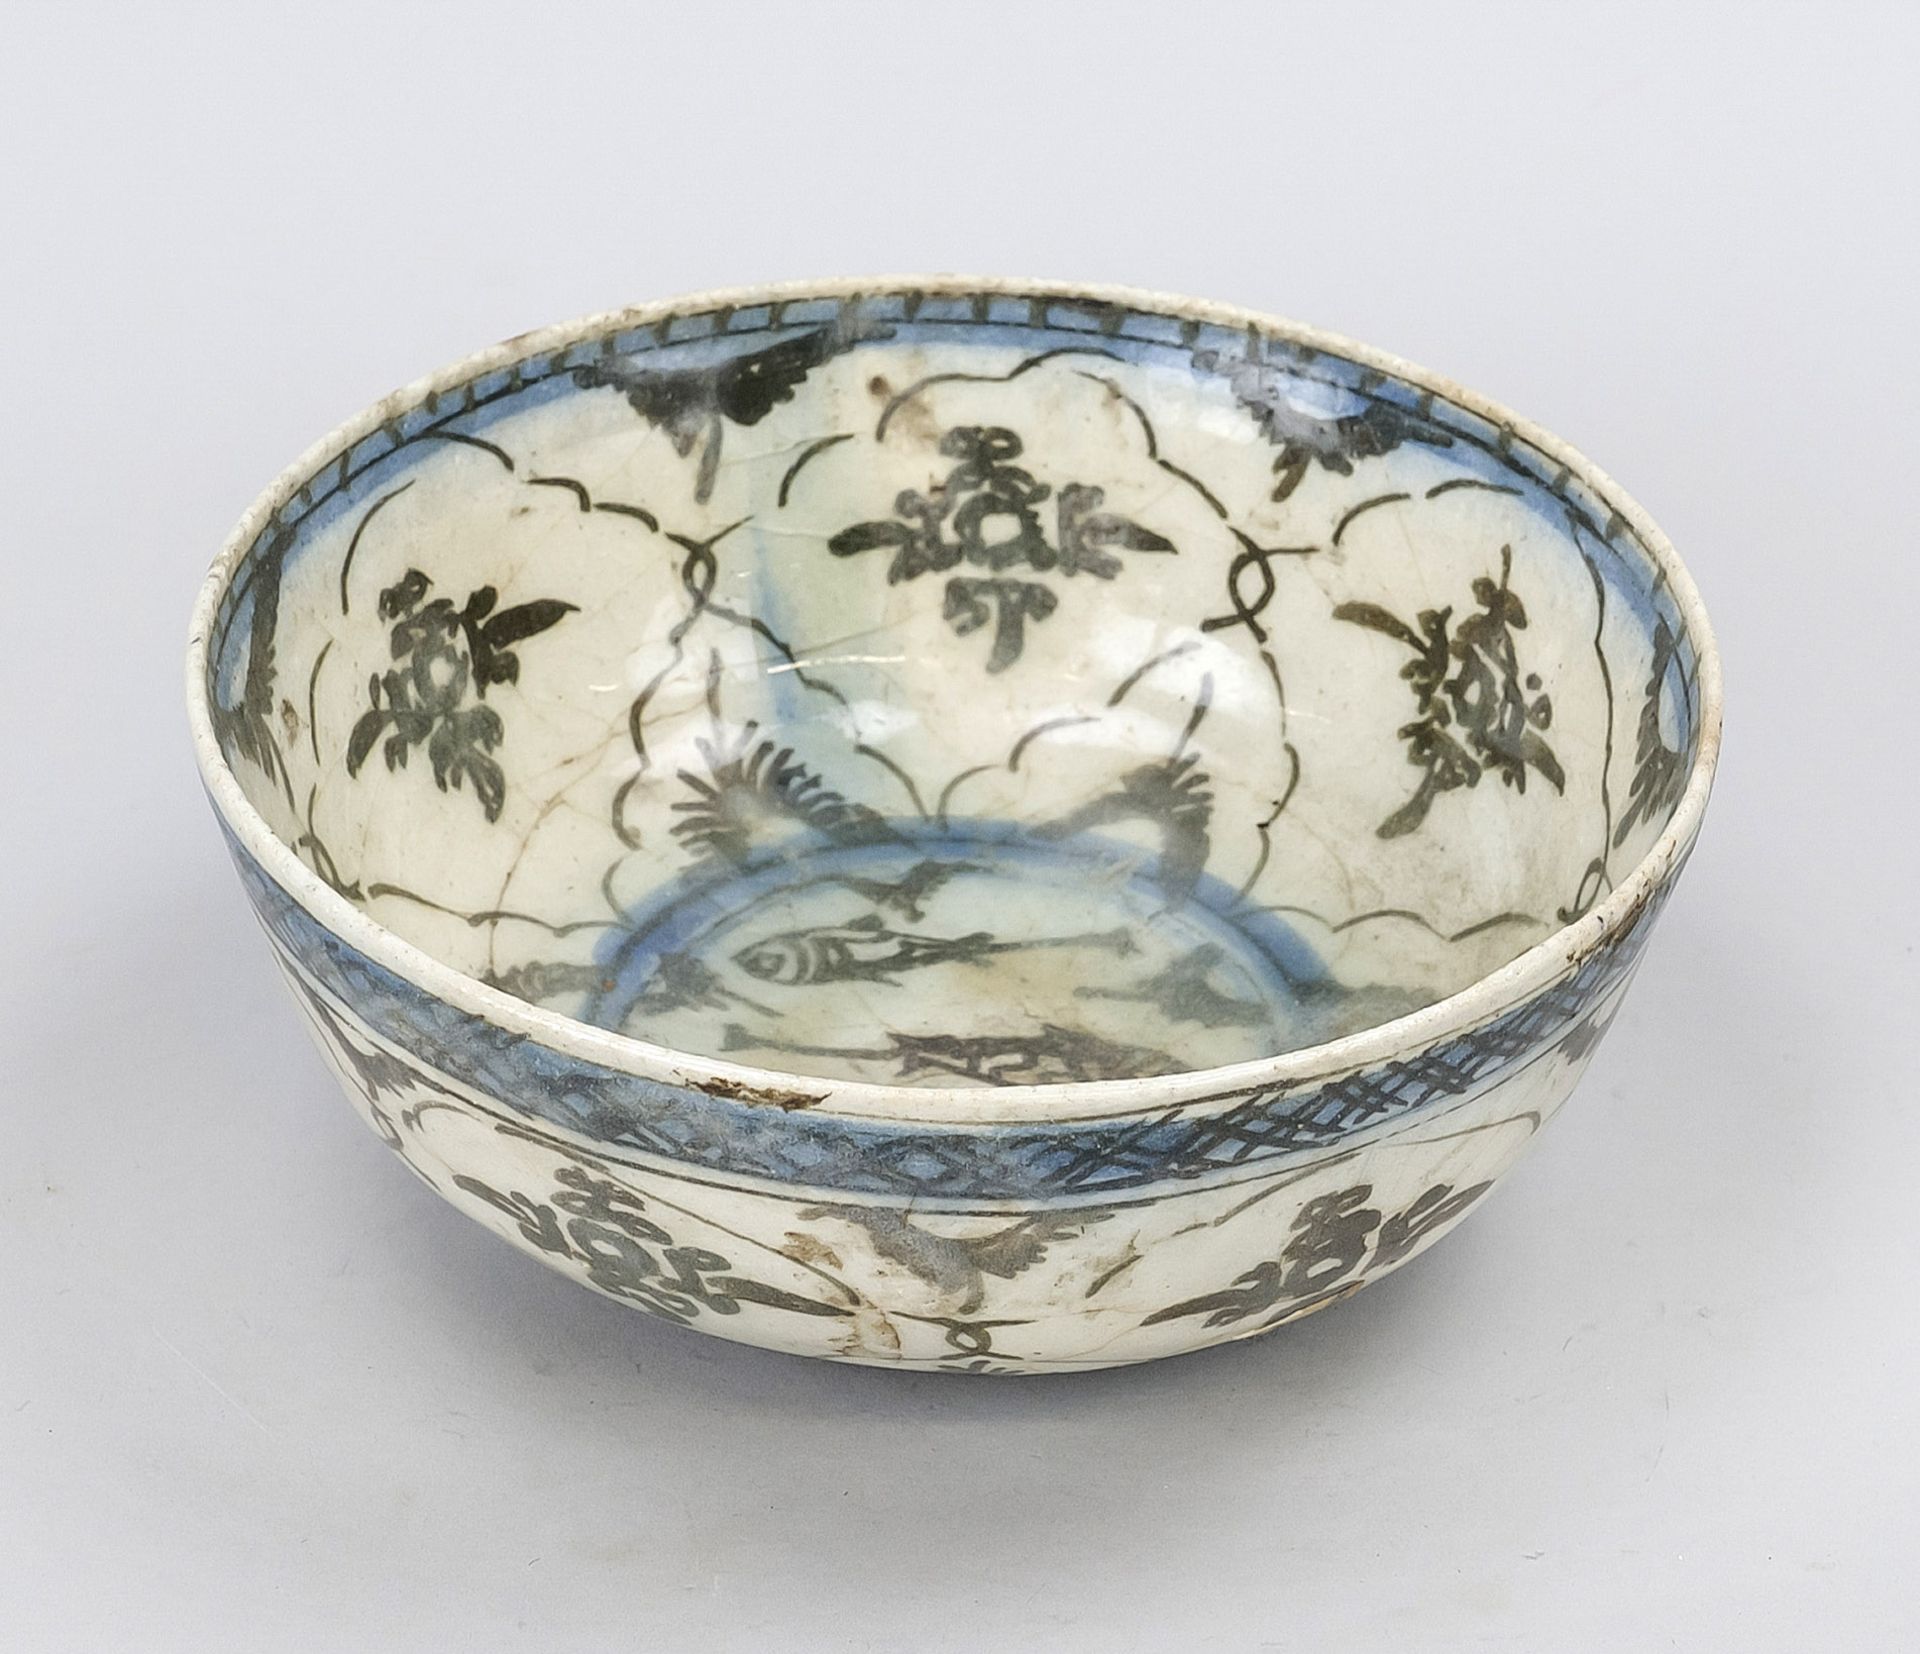 Fishbowl, China/Asia, exact age uncertain. Deep hollowed bowl with cobalt blue decoration,